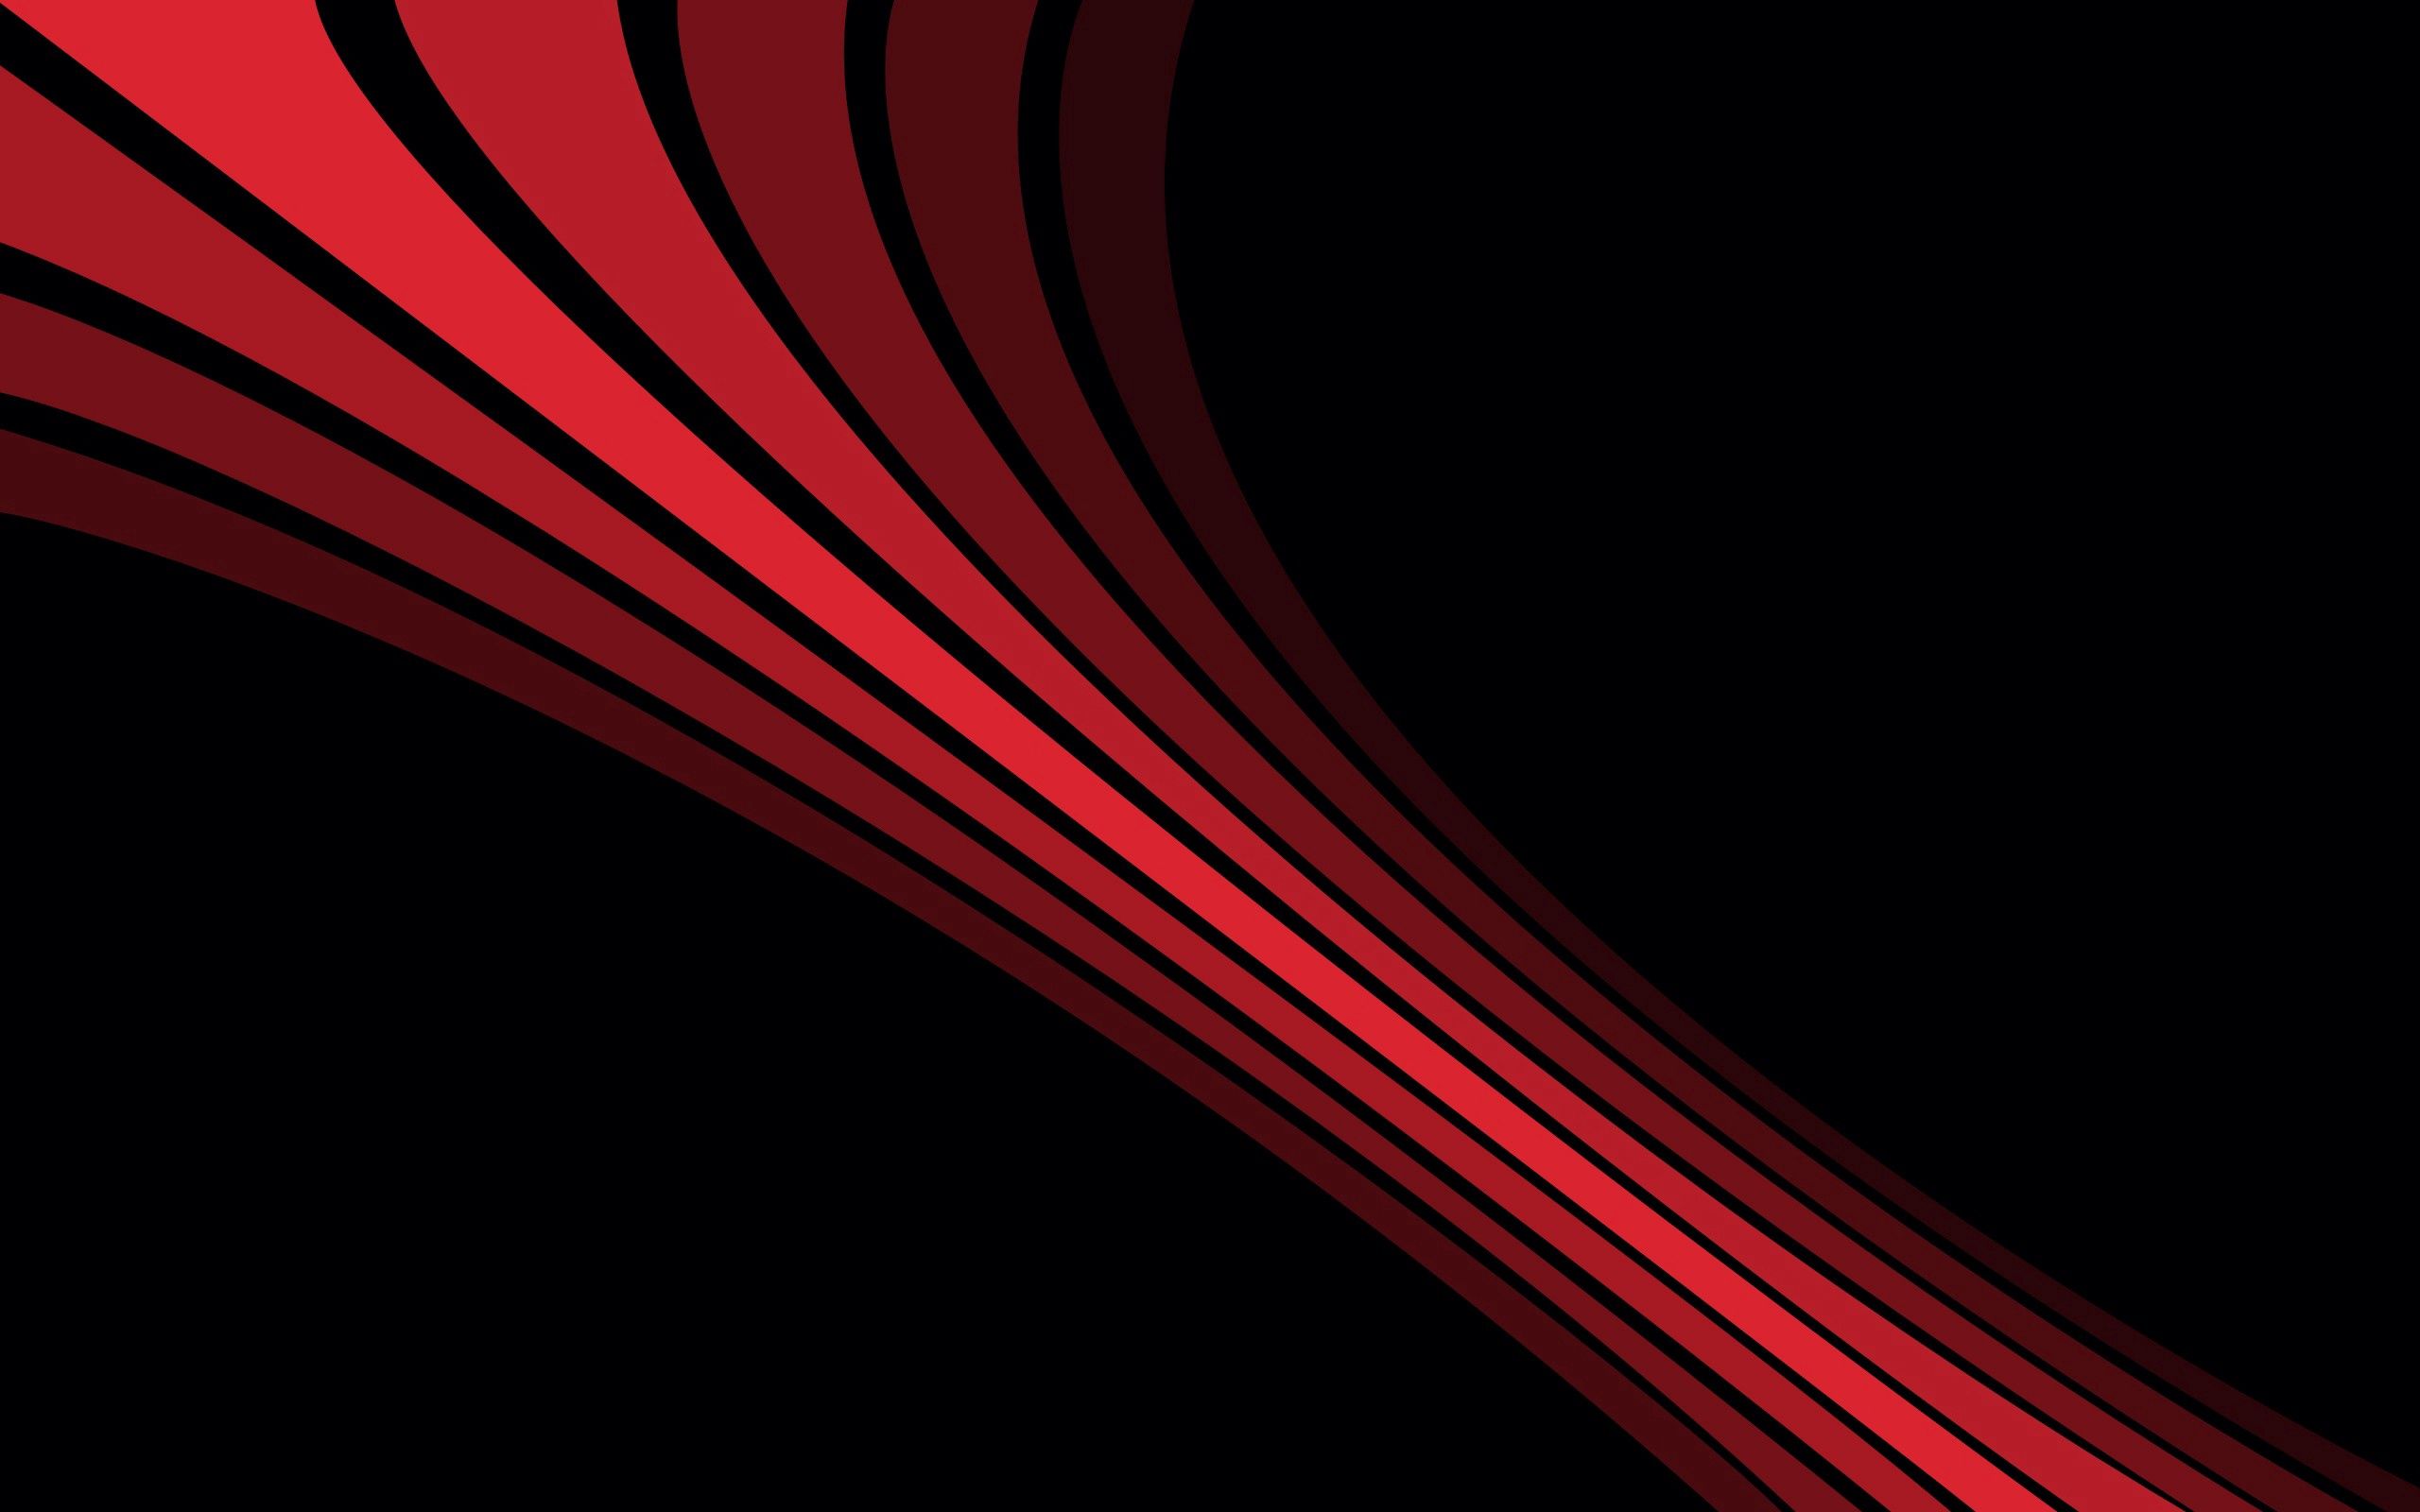 streaks, form, black, lines, abstract, red, shadow, stripes Full HD